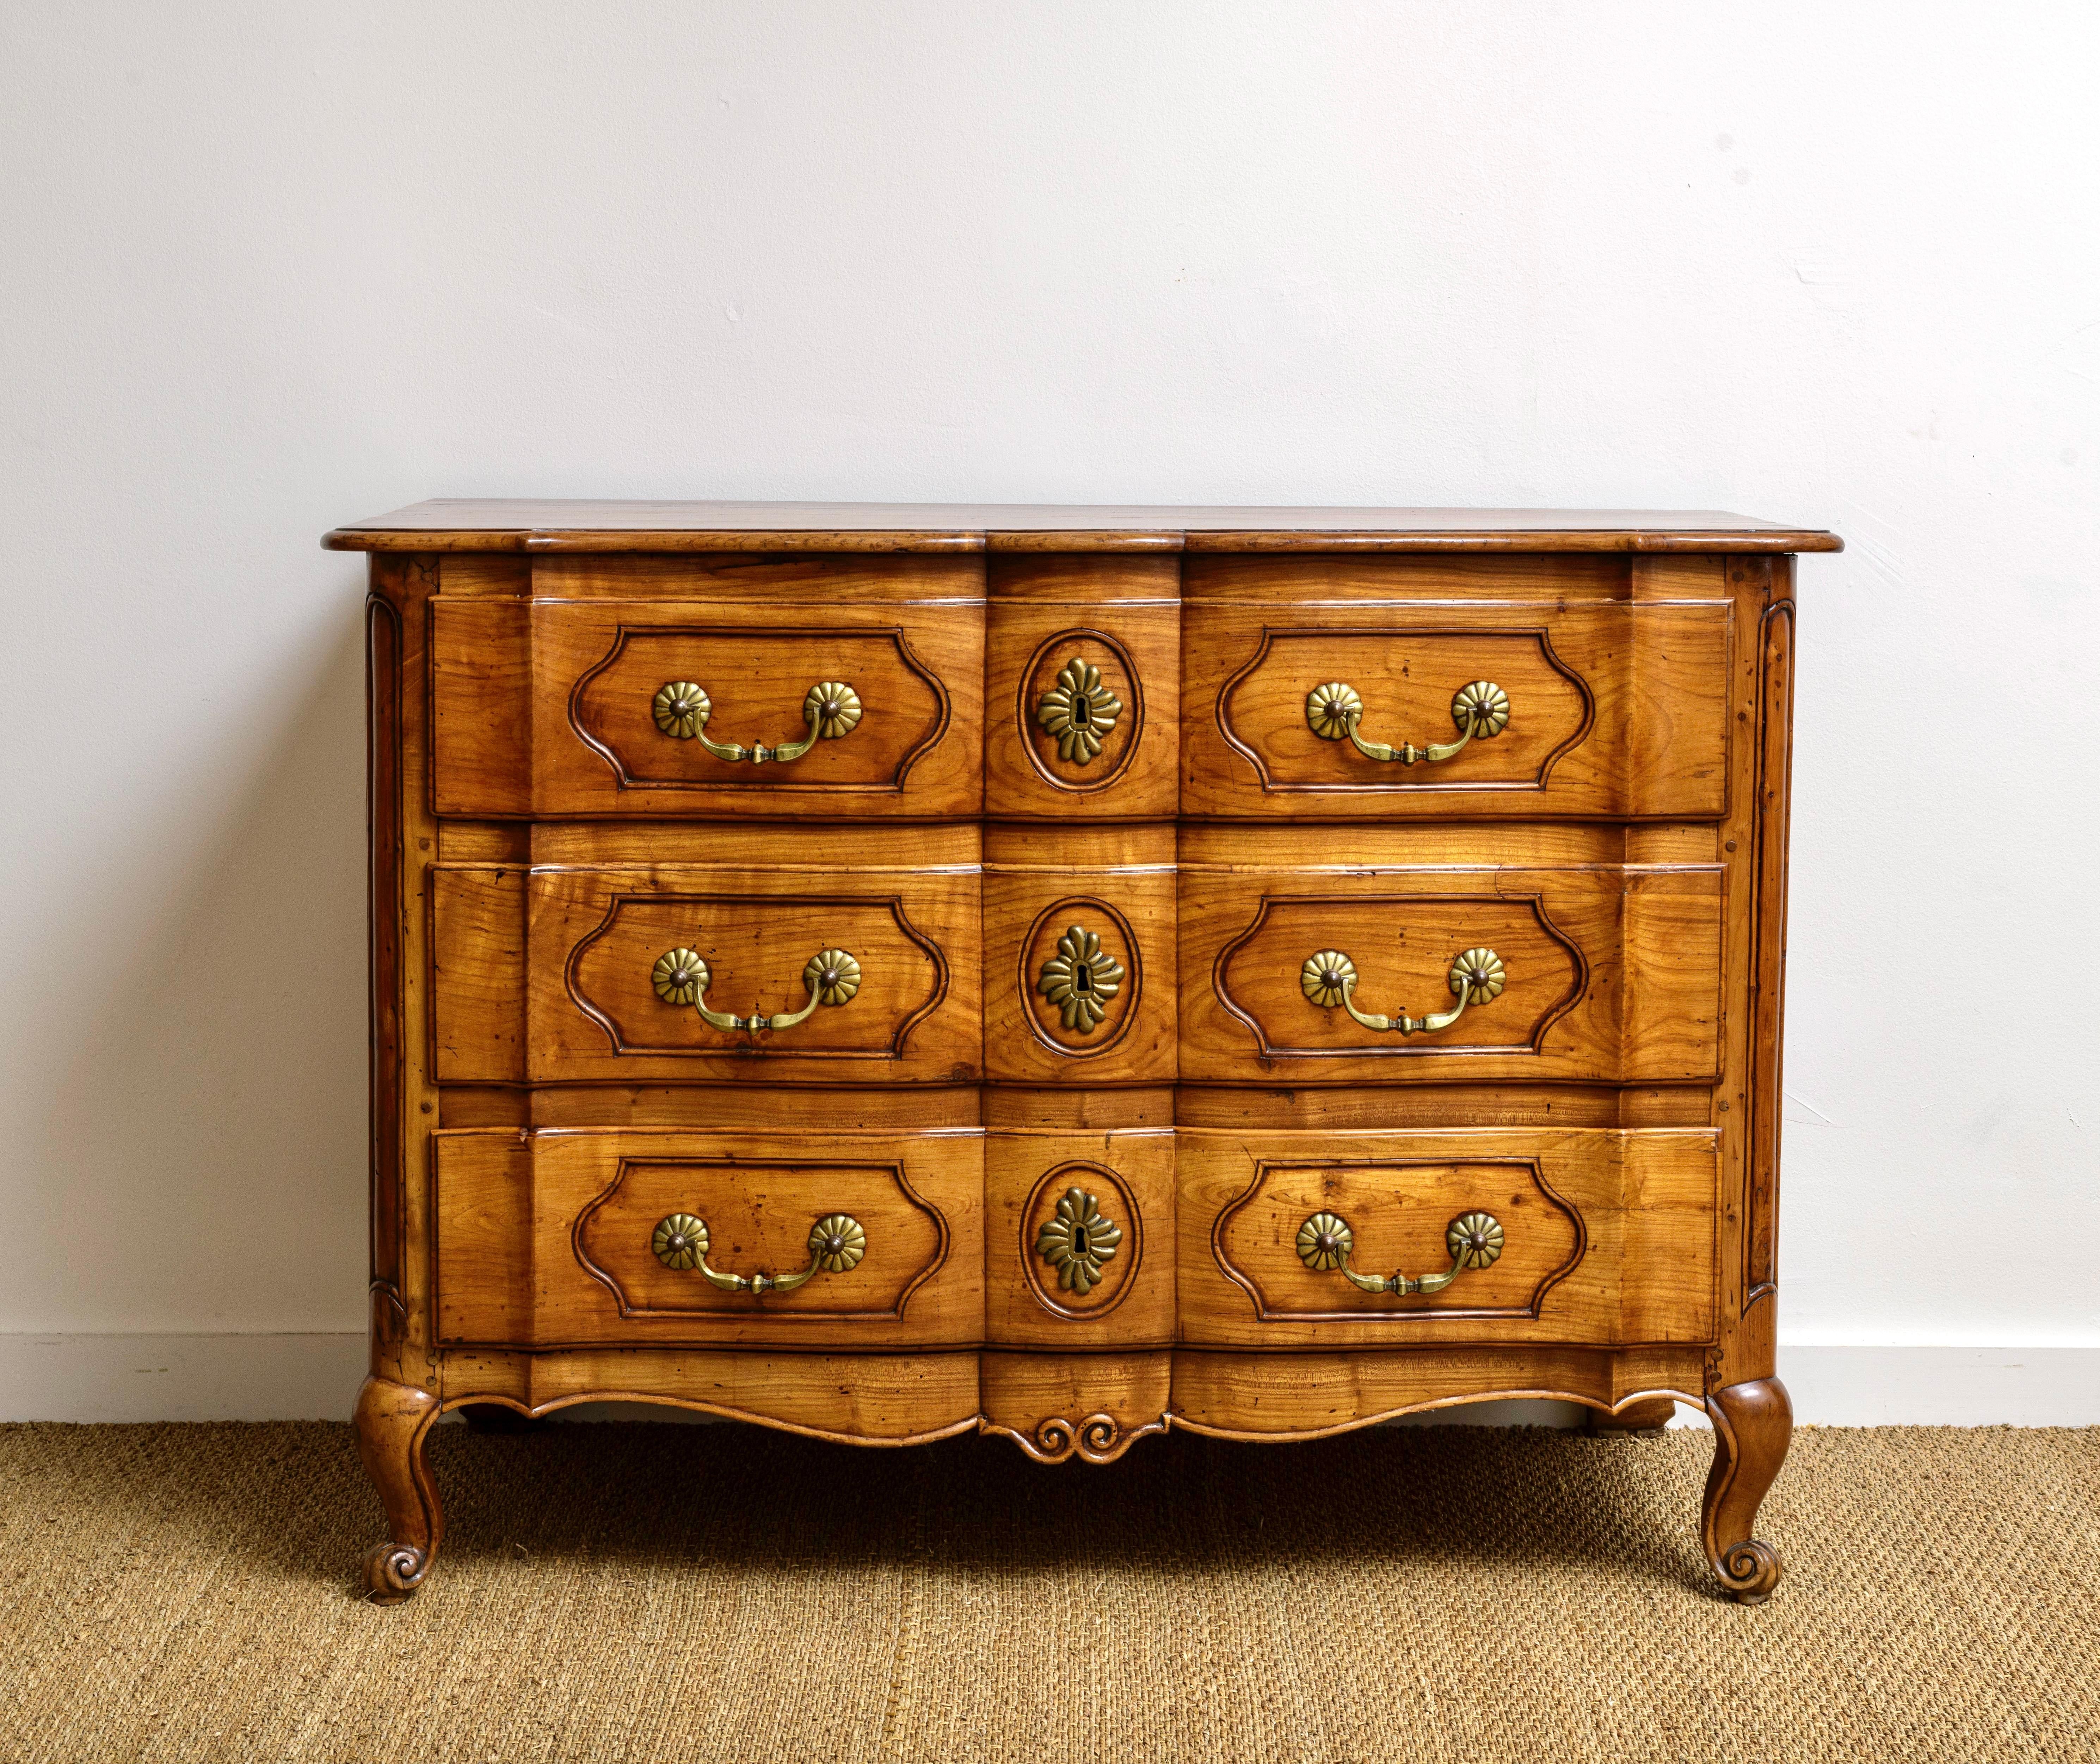 Exceptional carved French Régence walnut commode.   Has original hardware and a wonderful patina.  Carved drawers and frame,  ending in scroll feet both front and back.  Sides have a fantastic 